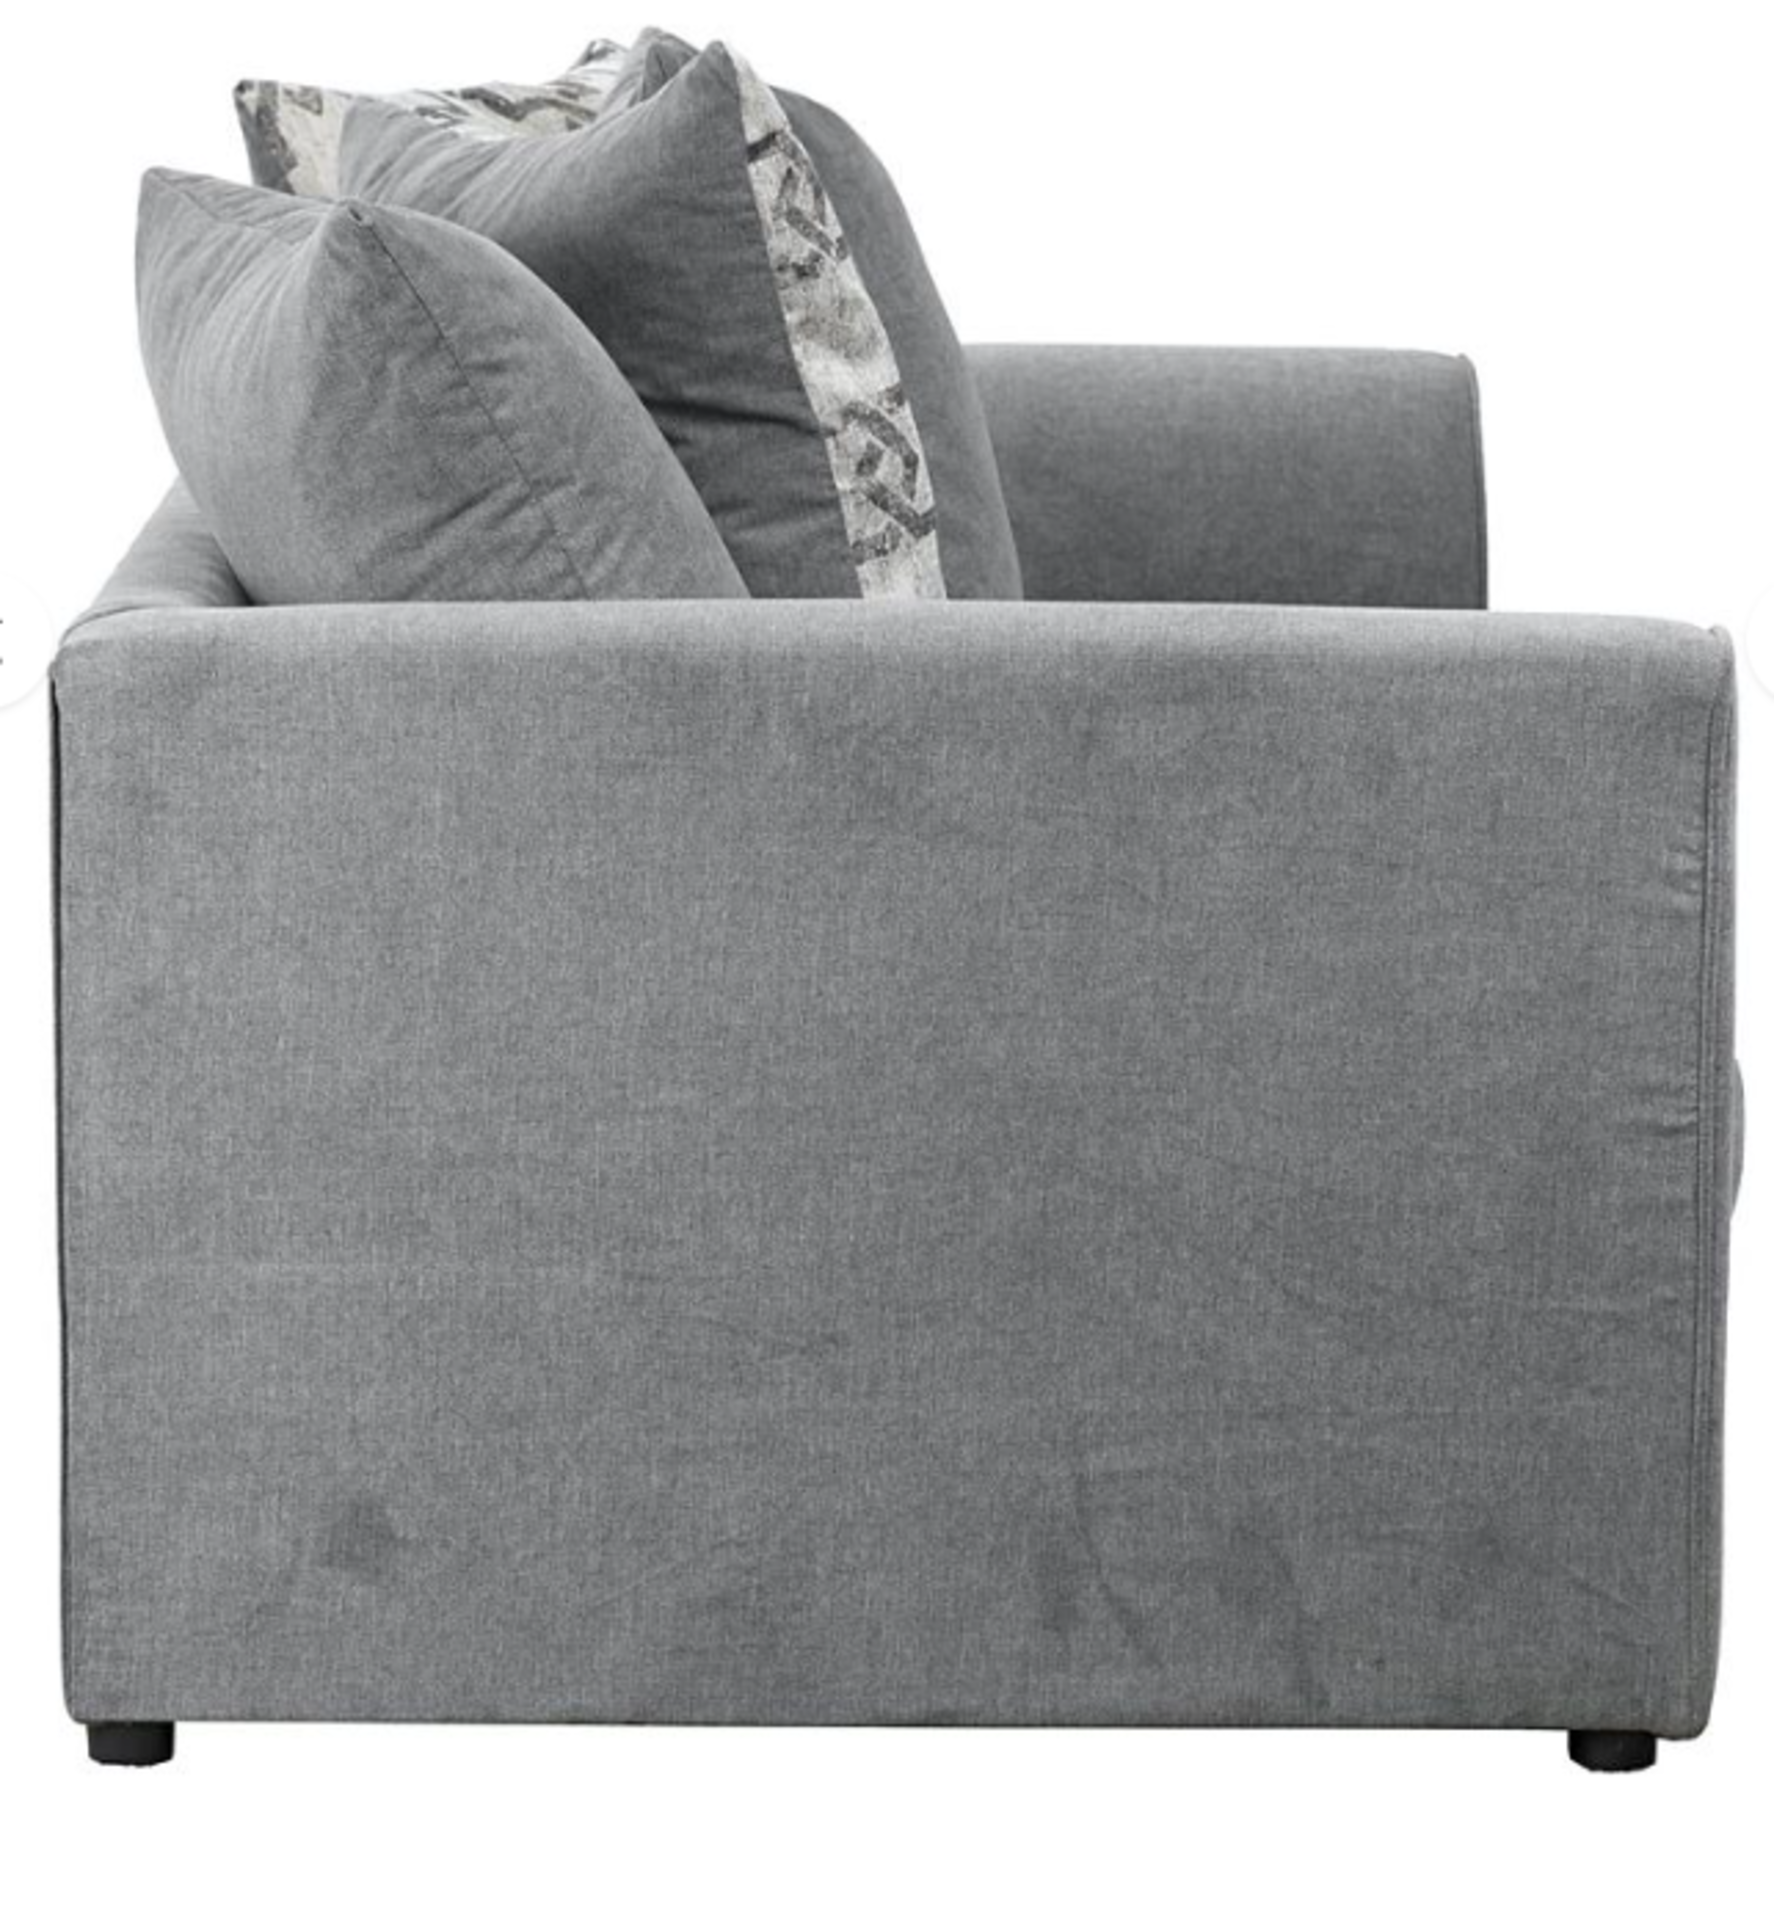 Grace 3 Seater Sofa. - SR. RRP £949.00. This Grace 3 Seater Sofa is perfect for those after a - Image 2 of 2